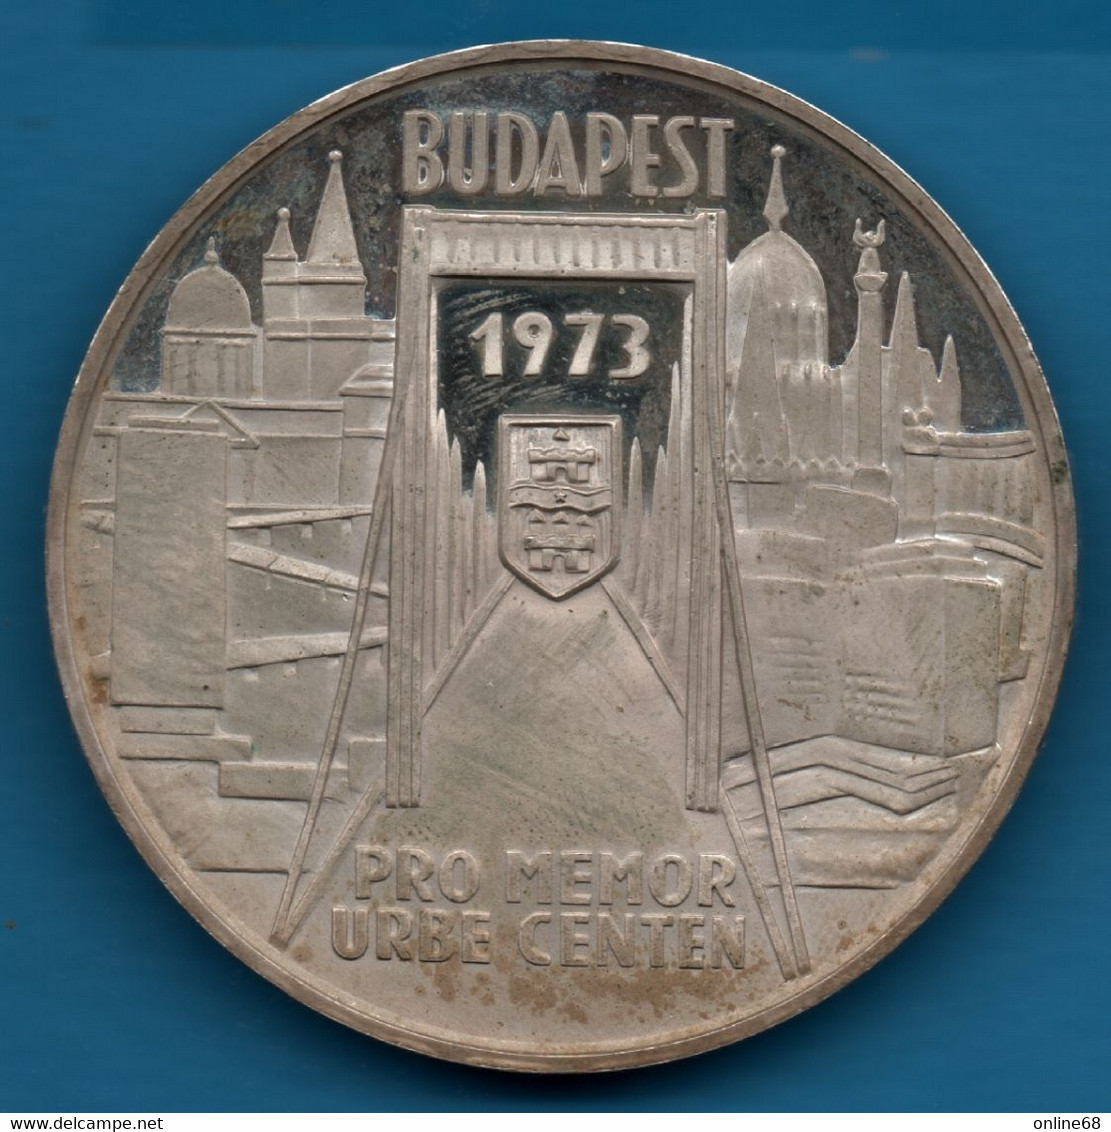 HUNGARY BUDAPEST 1873-1973 PRO MEMOR URBE CENTEN  Argent 835‰ Silver Cities Of Pest, Buda, Obuda Merged Into One - Firma's